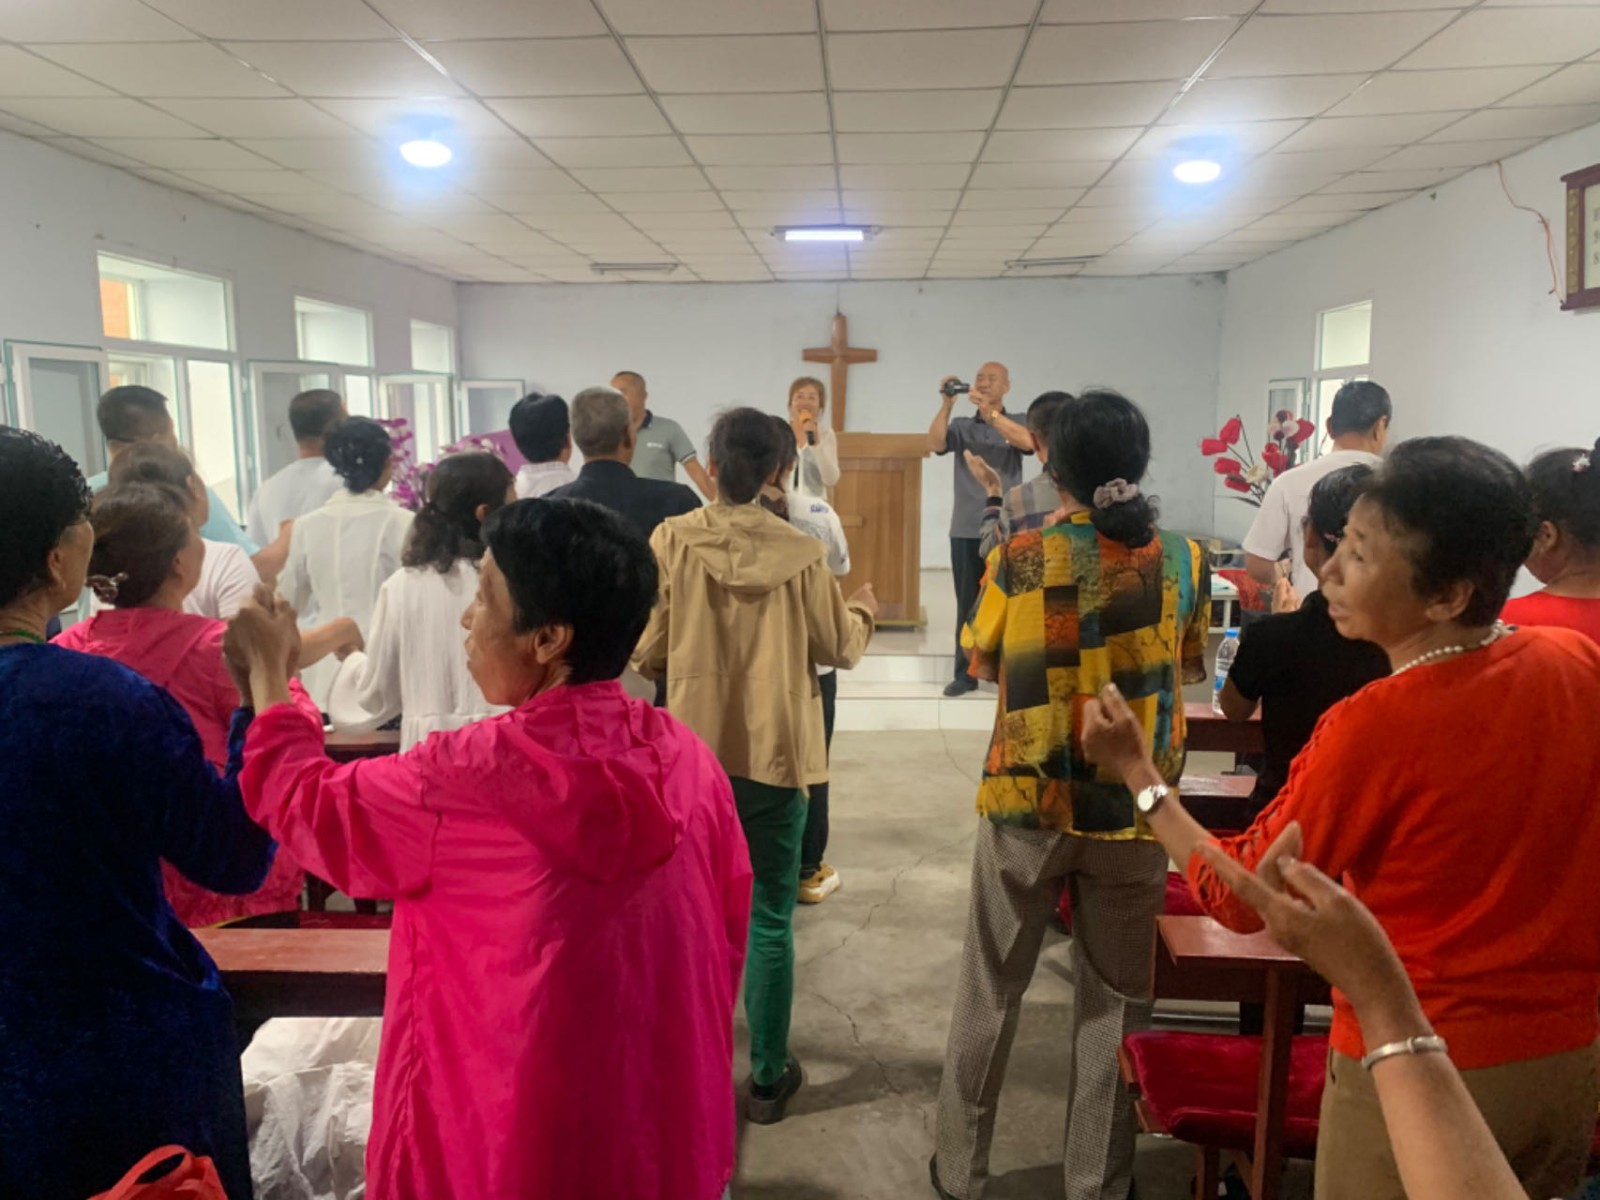 A retreat was held at a rural church in a county-level city, Jilin, in June, 2023